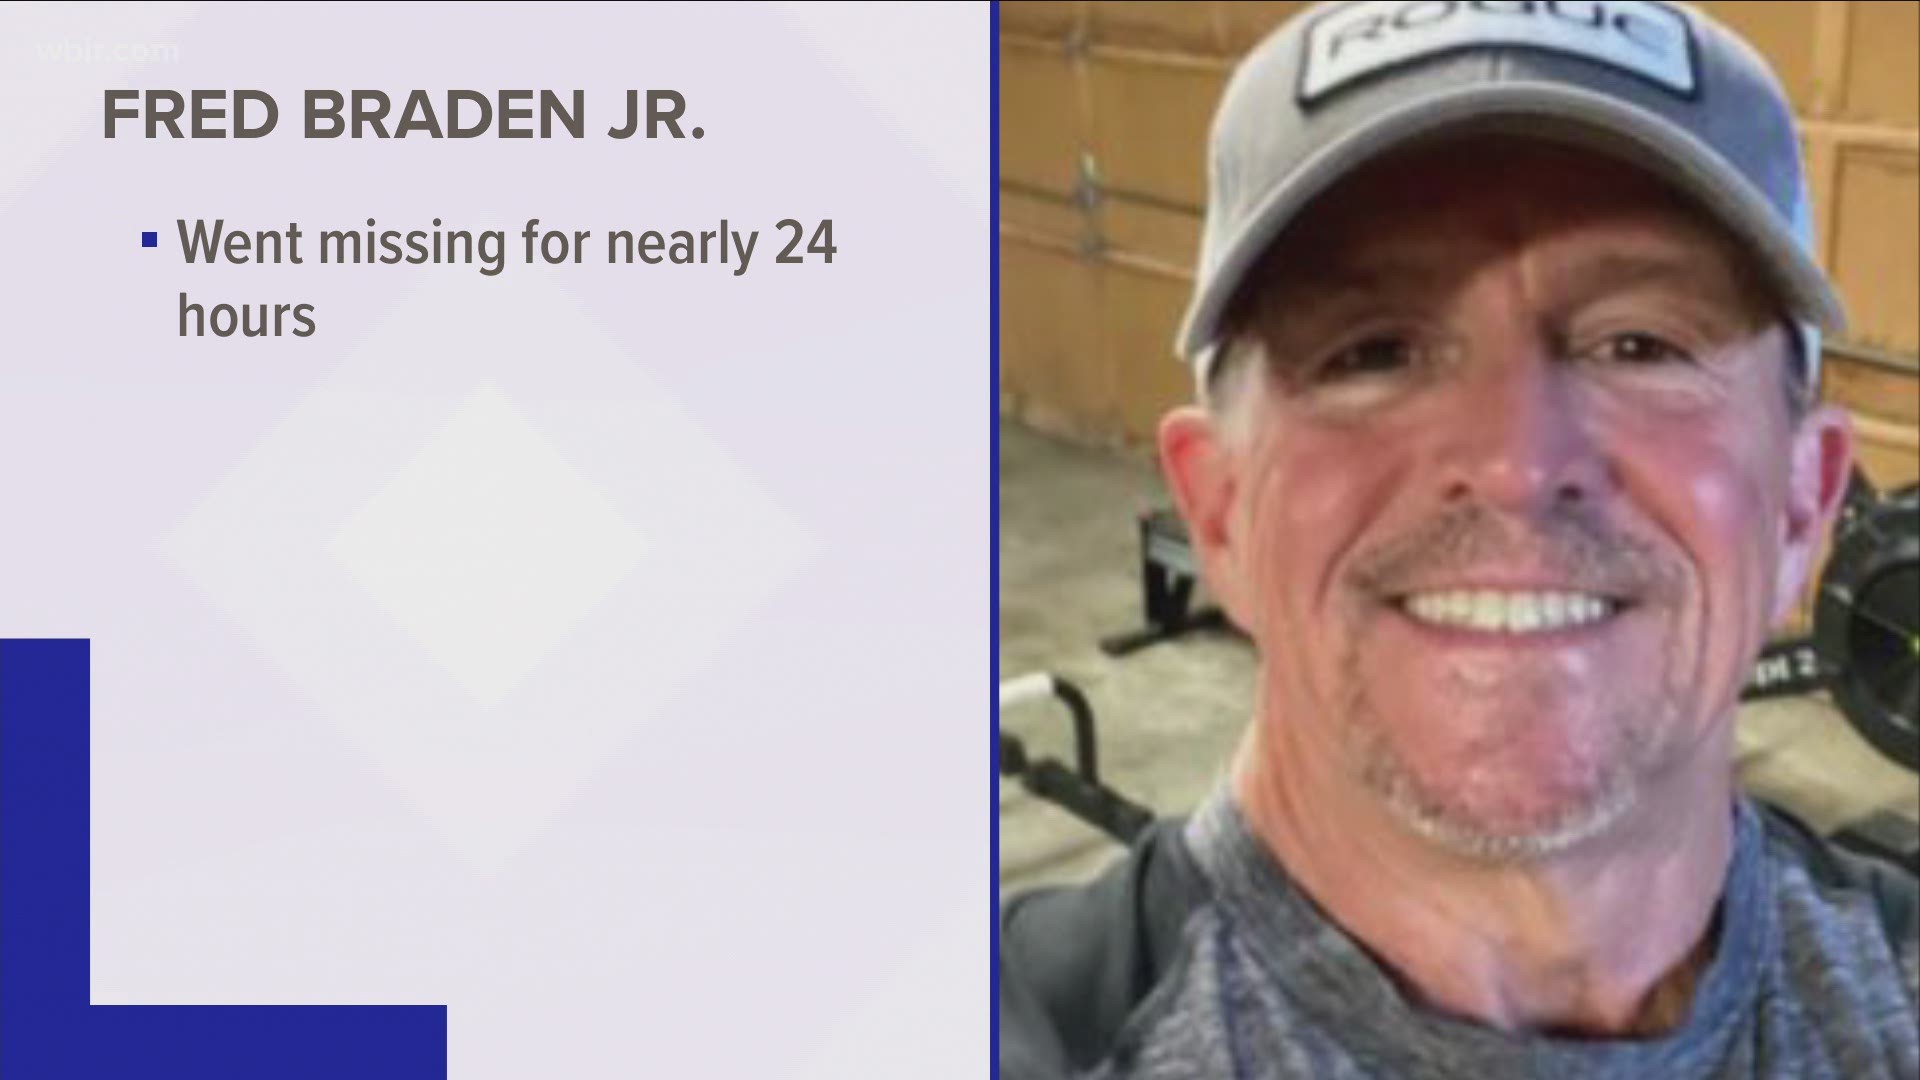 The National Park Service said rangers found 56-year-old "Fred Braden Jr." yesterday. He was missing for nearly 24 hours.